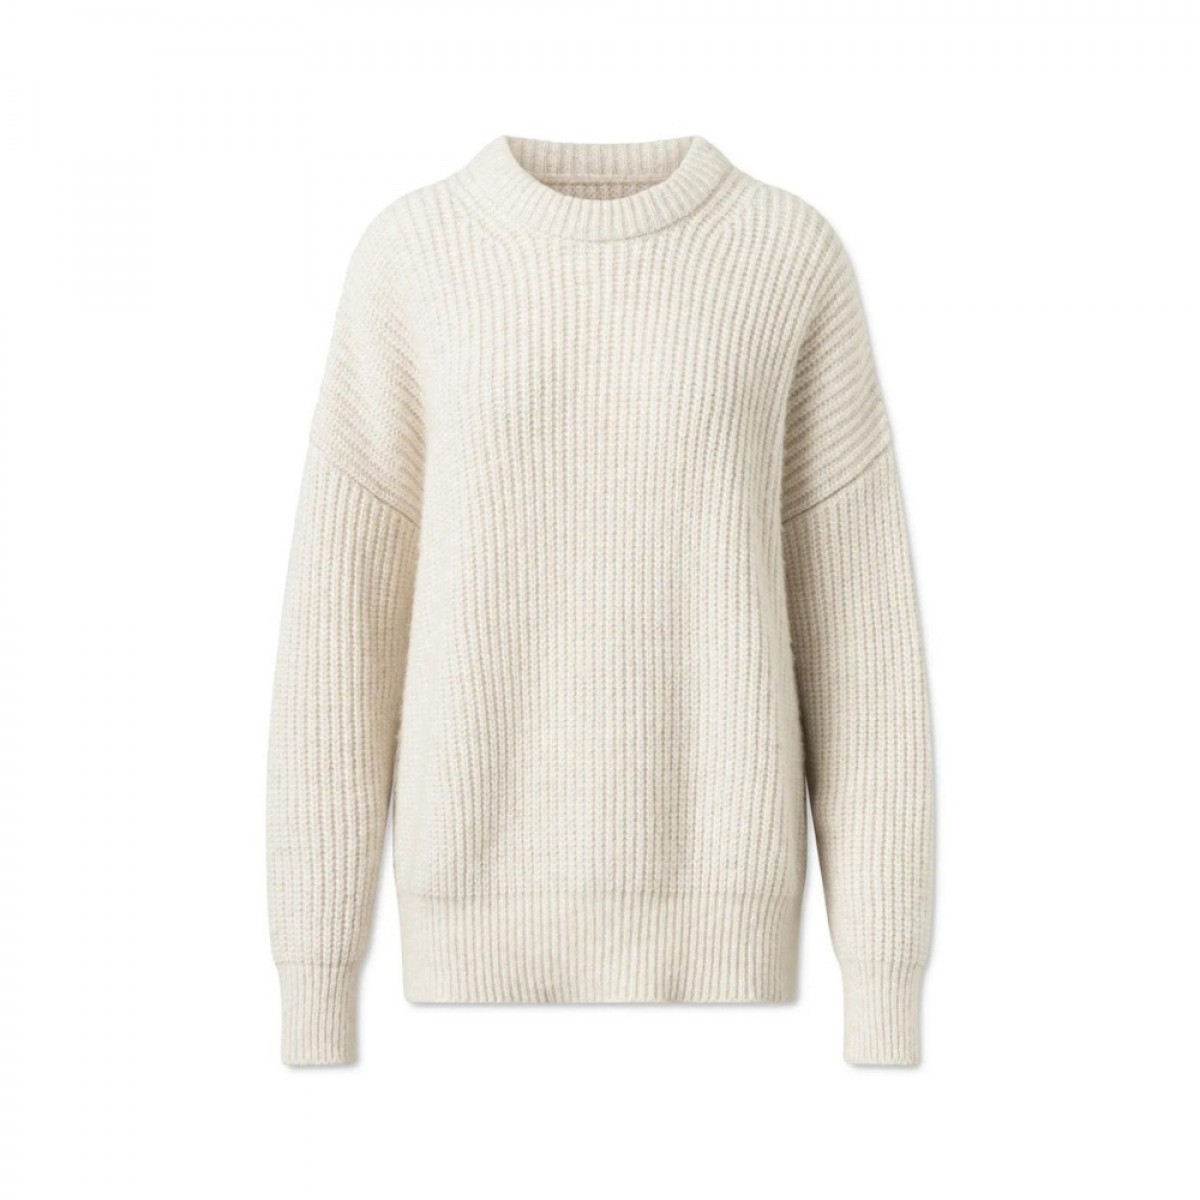 joelle pullover - oatmeal - front